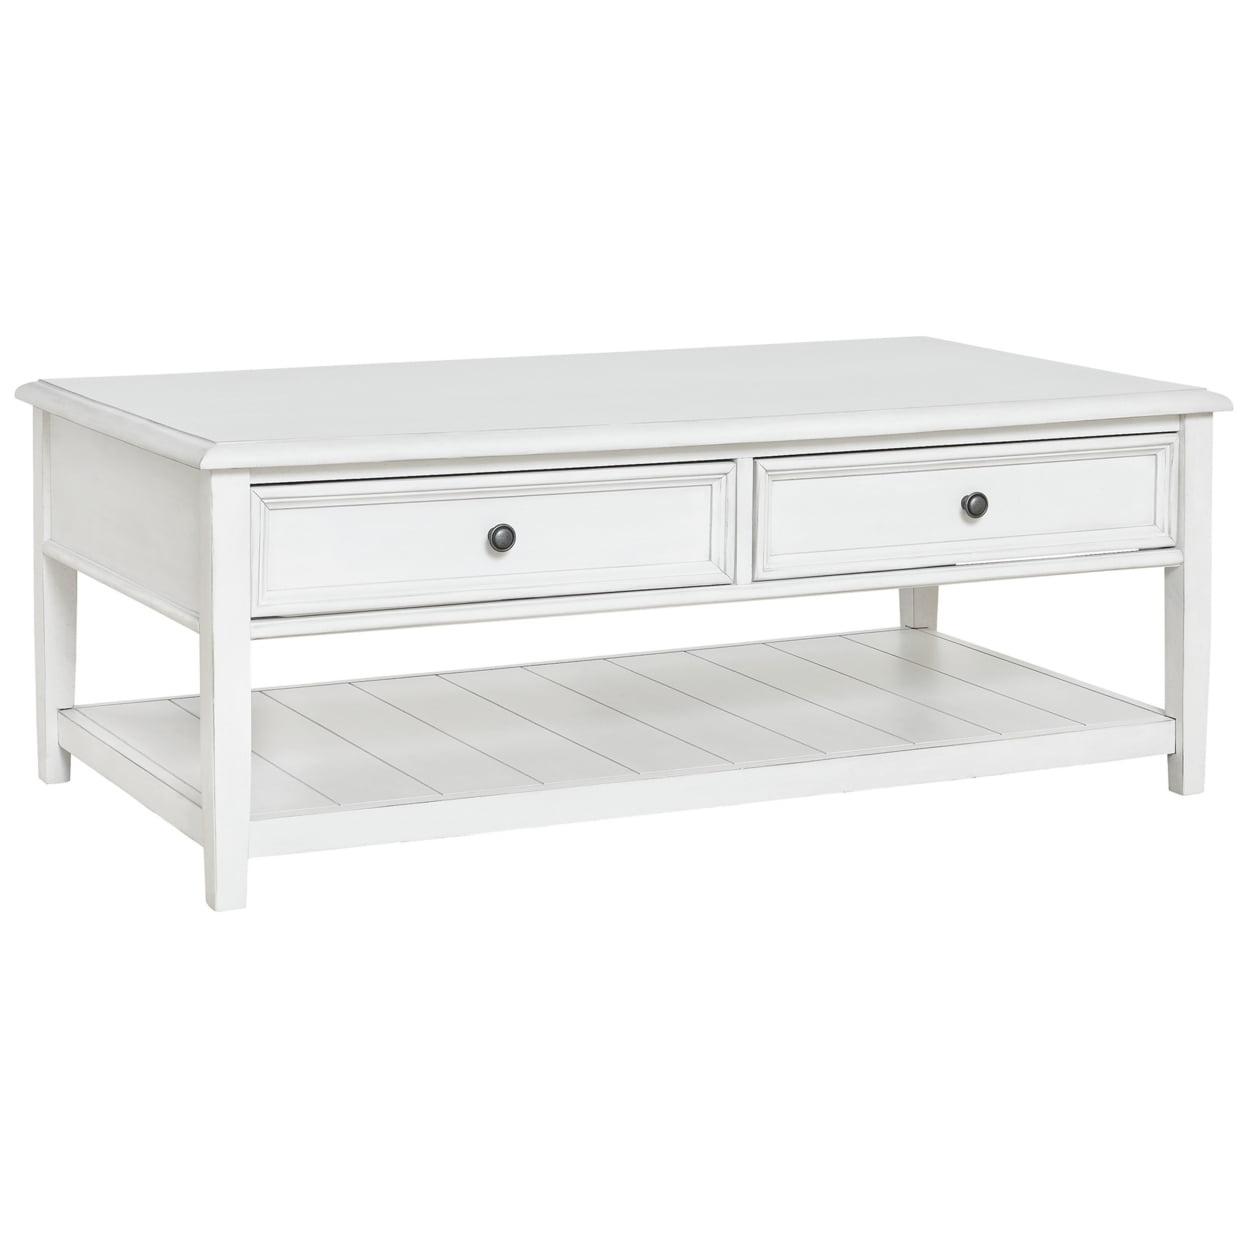 Classic White Rectangular Lift-top Coffee Table with Storage